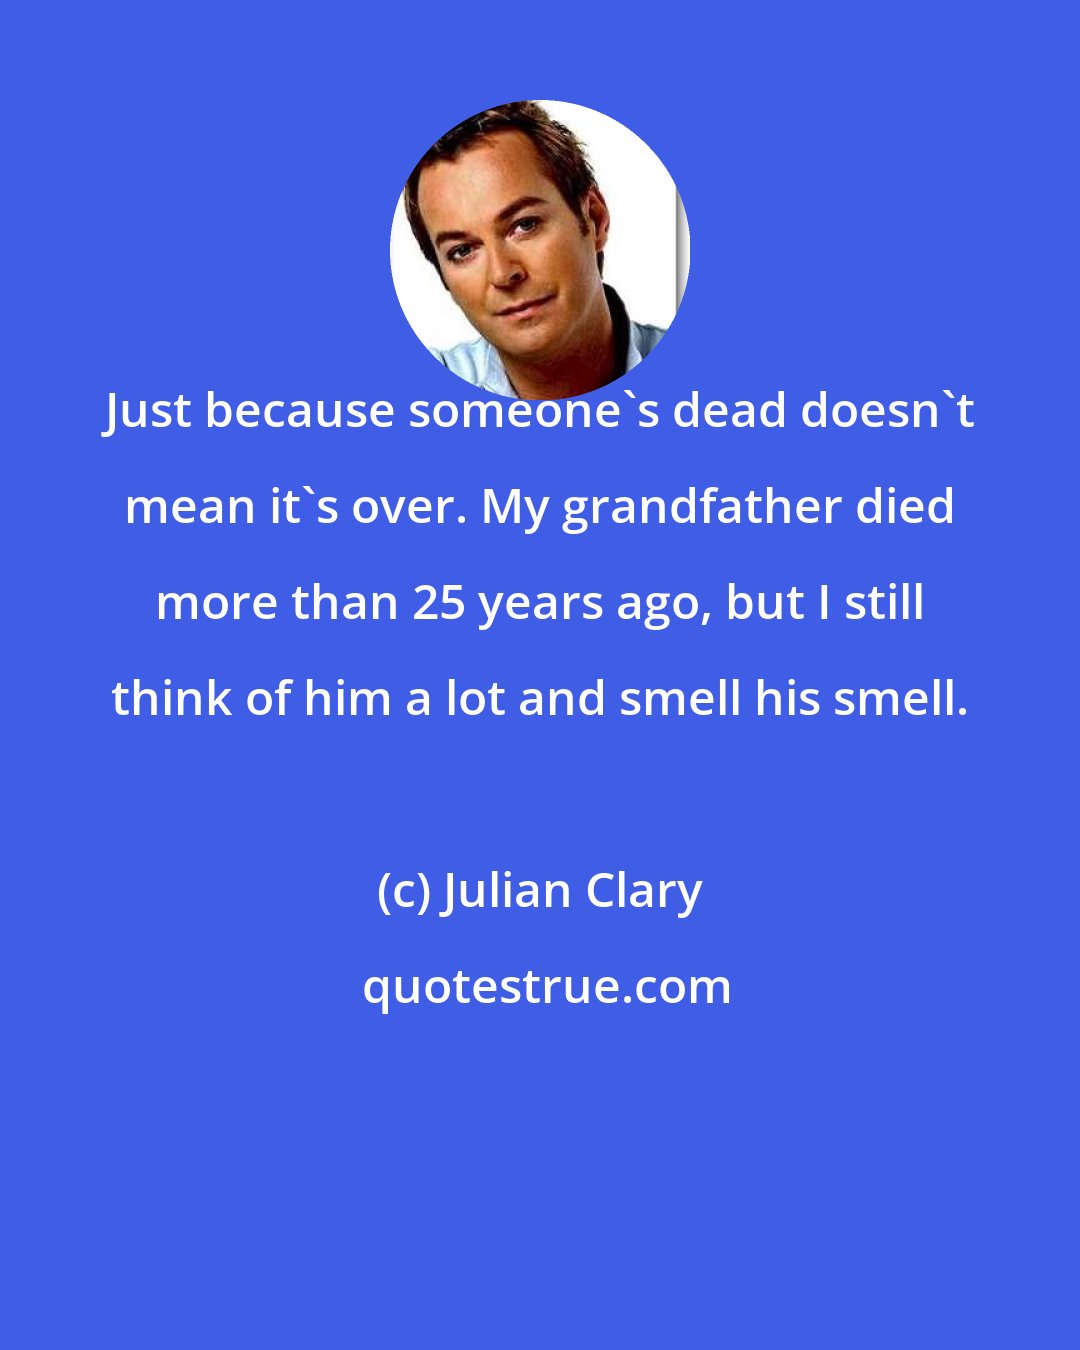 Julian Clary: Just because someone's dead doesn't mean it's over. My grandfather died more than 25 years ago, but I still think of him a lot and smell his smell.